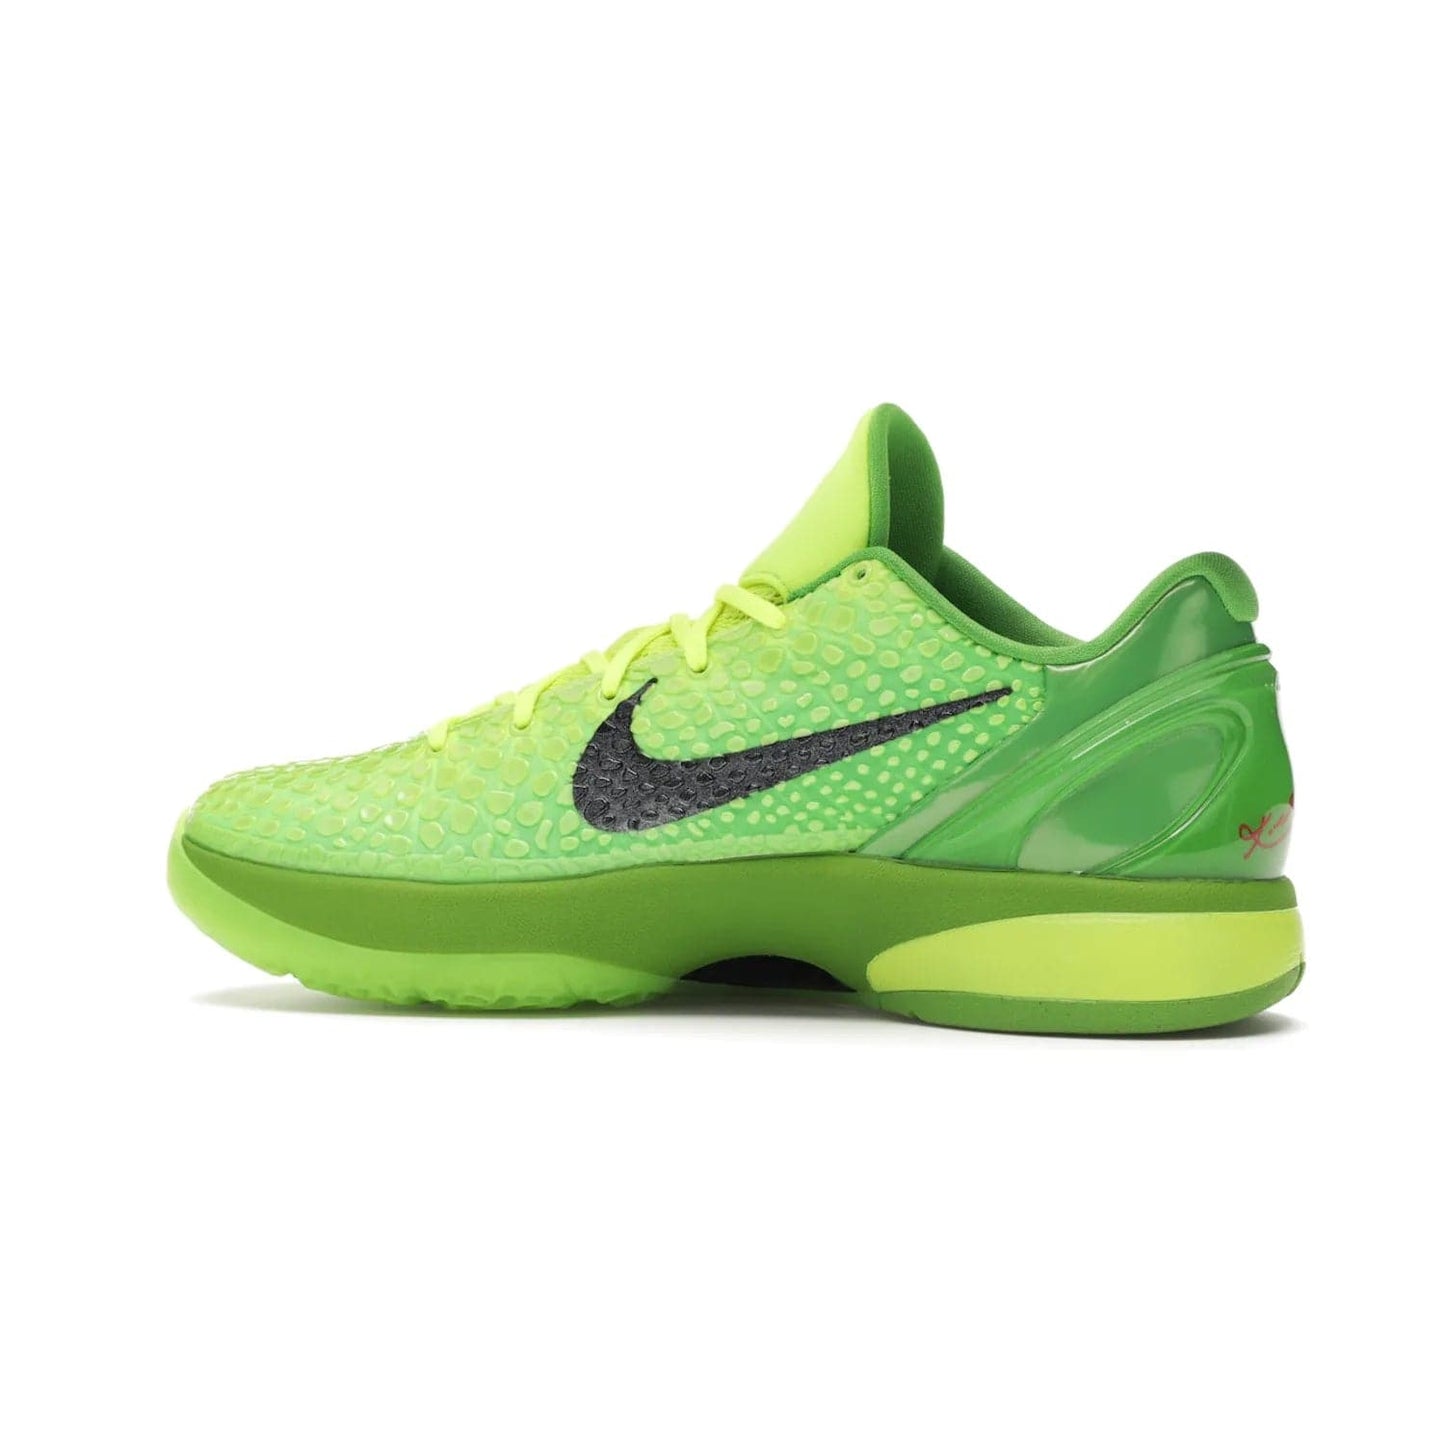 Nike Kobe 6 Protro Grinch (2020) - Image 21 - Only at www.BallersClubKickz.com - #
The Nike Kobe 6 Protro Grinch updates the iconic 2011 design with modern tech like a Zoom Air cushioning system, scaled-down traction, and updated silhouette. Experience the textured Green Apple and Volt upper plus bright red and green accents for $180.